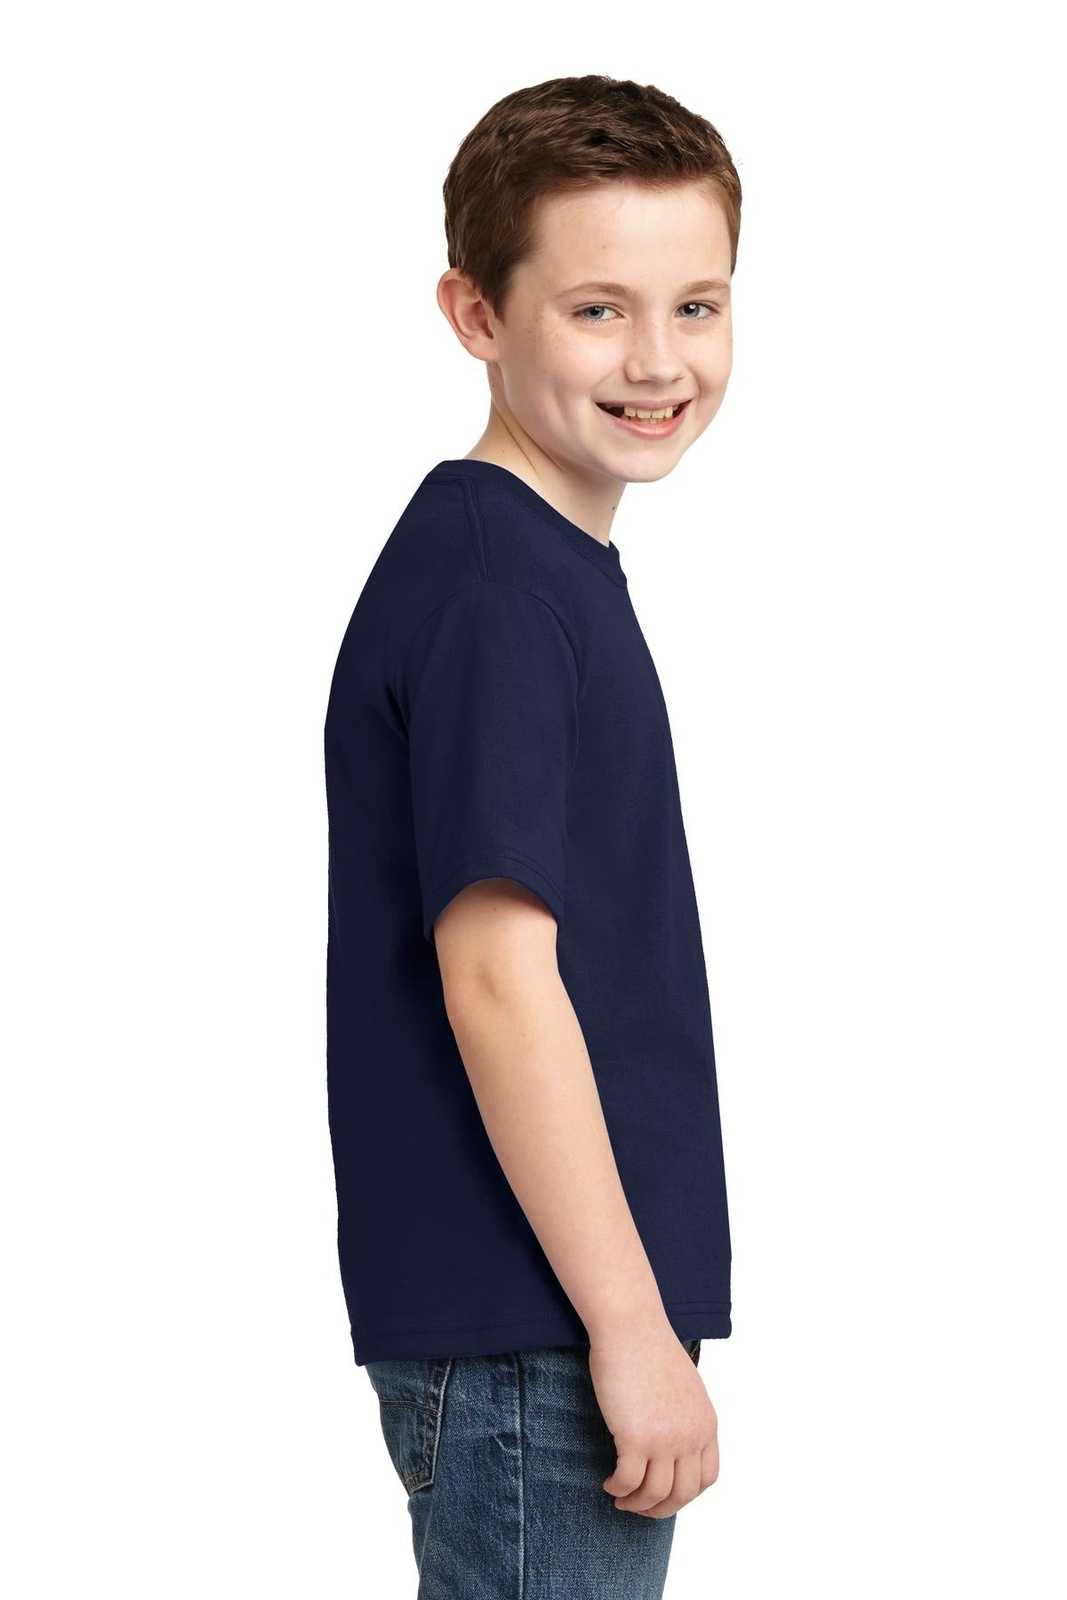 Jerzees 29B Youth Dri-Power 50/50 Cotton/Poly T-Shirt - Navy - HIT a Double